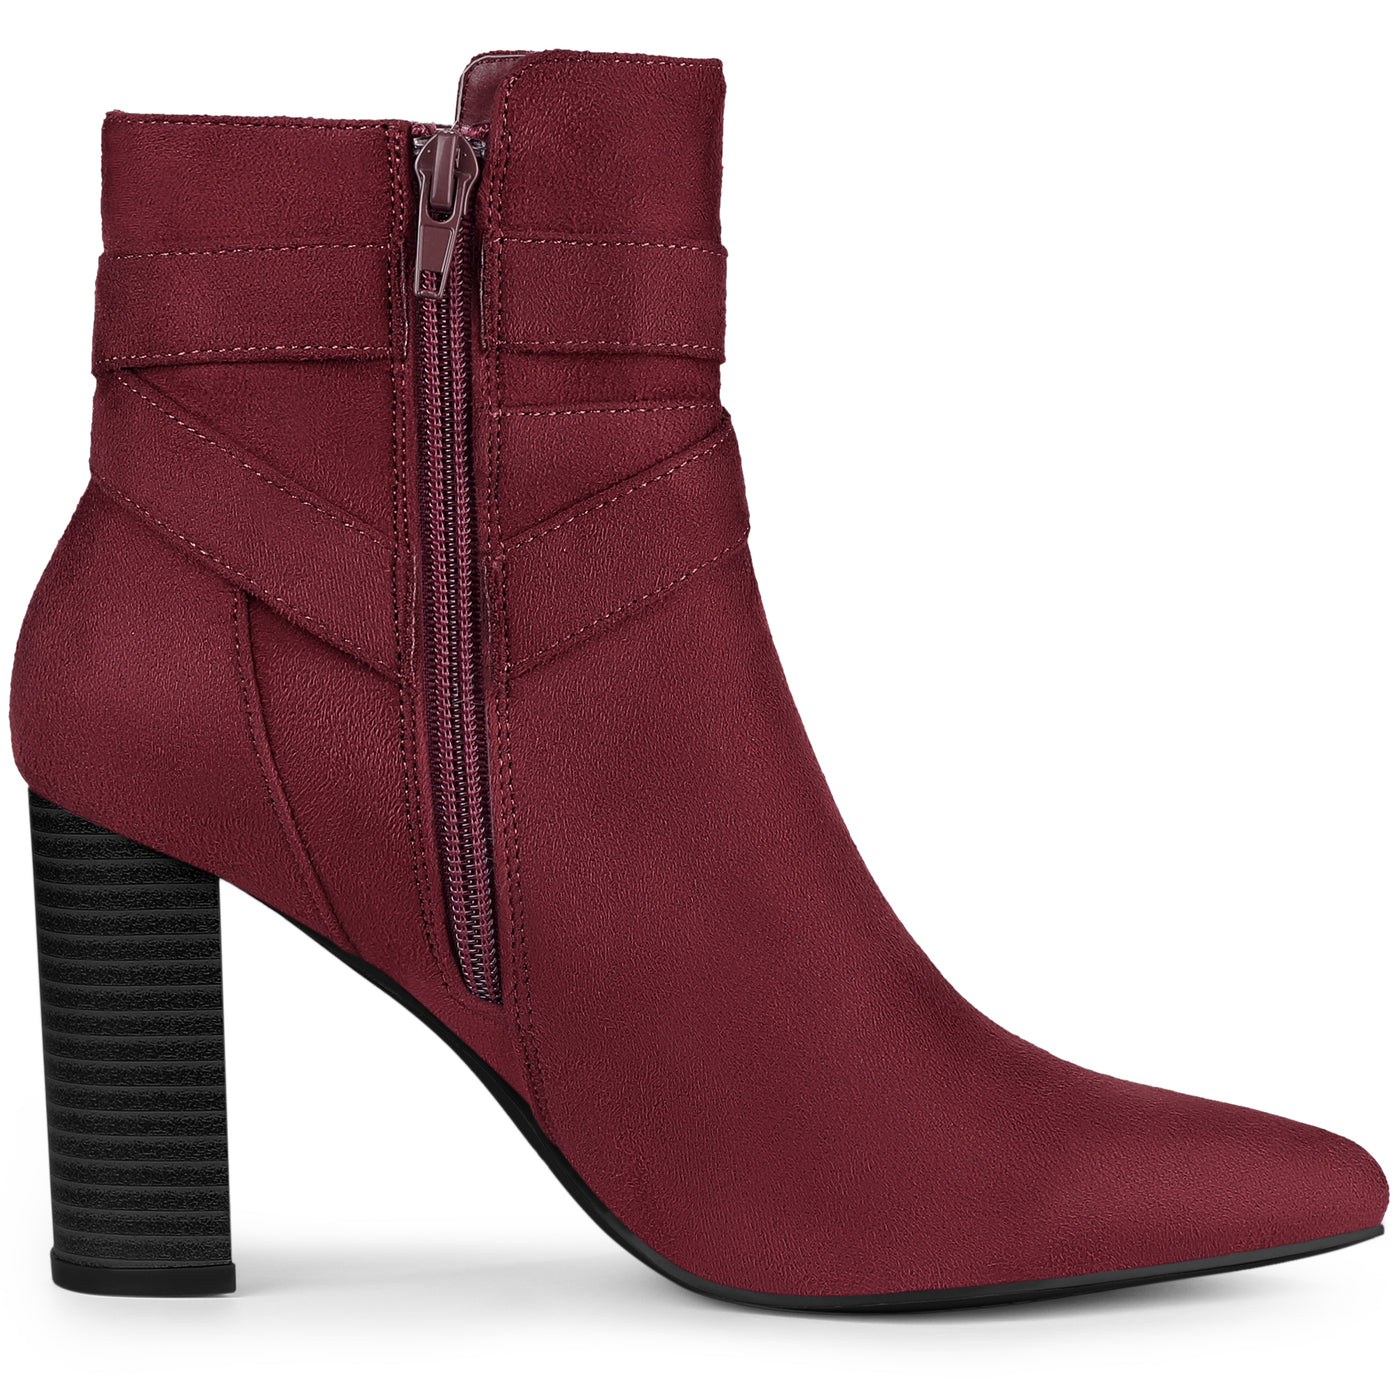 Allegra K Pointed Toe Buckle Decor Chunky Heel Ankle Boots